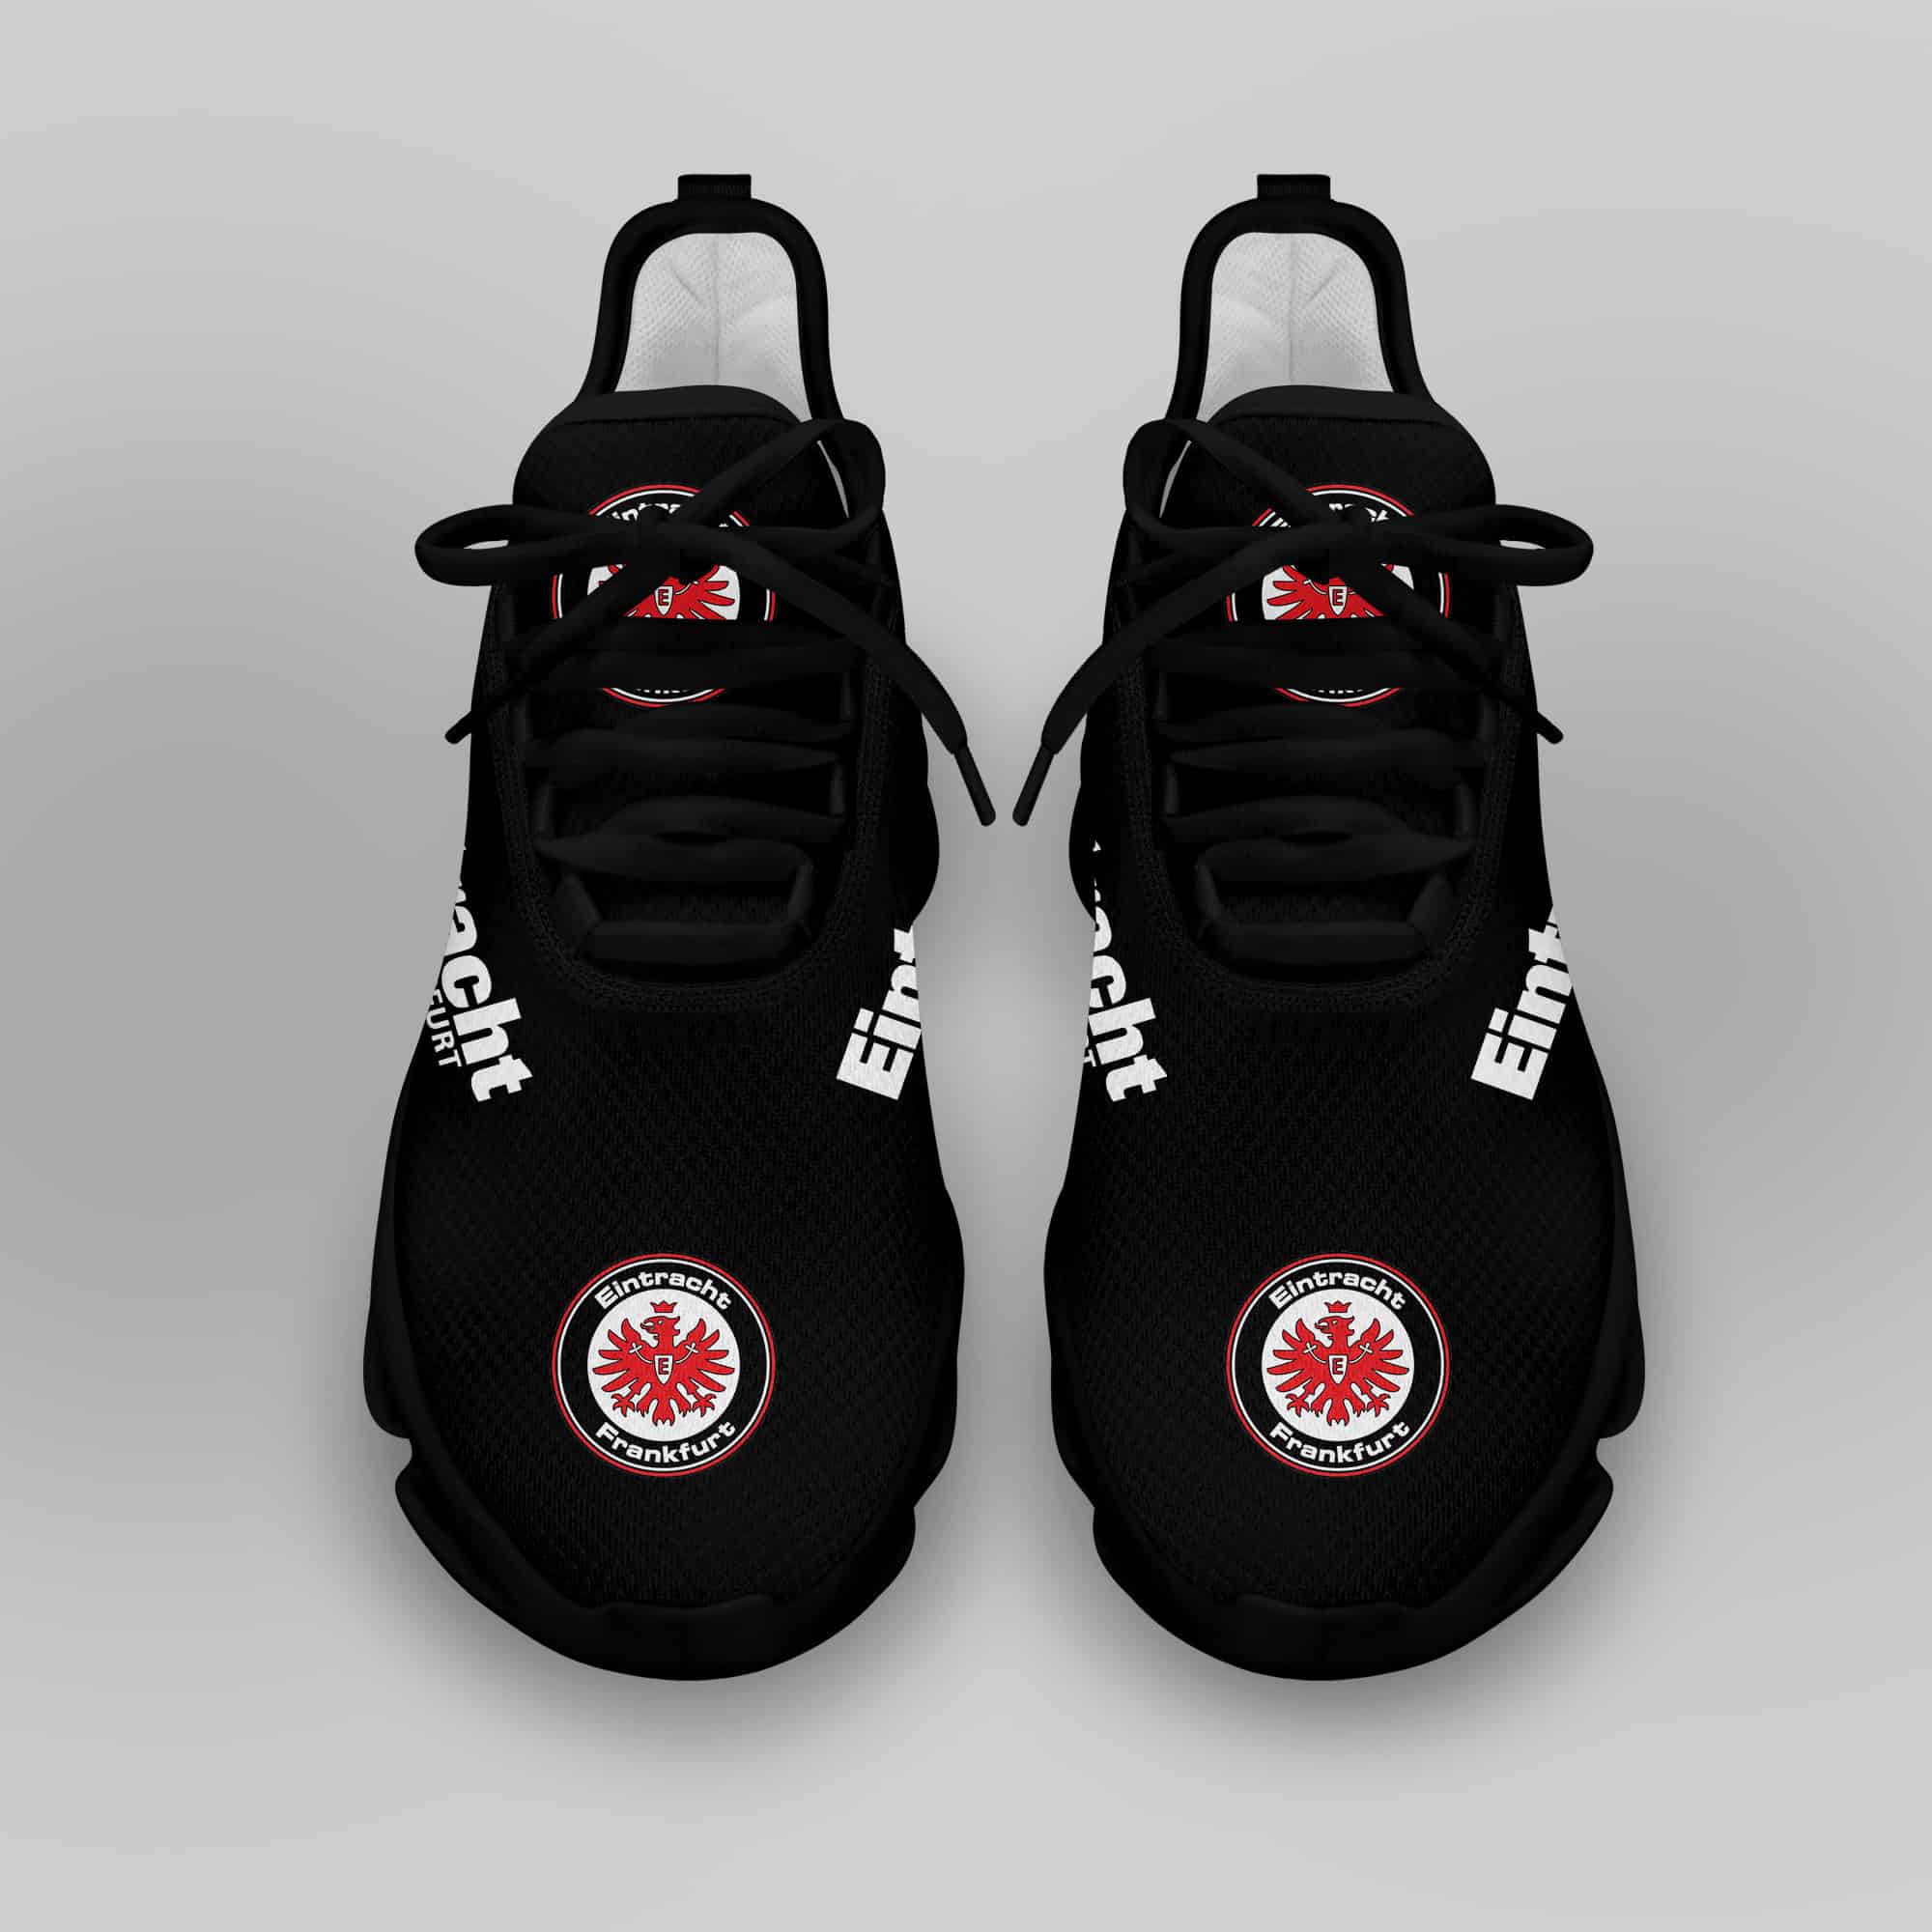 Eintracht Frankfurt Running Shoes Max Soul Shoes Sneakers Ver 8 4